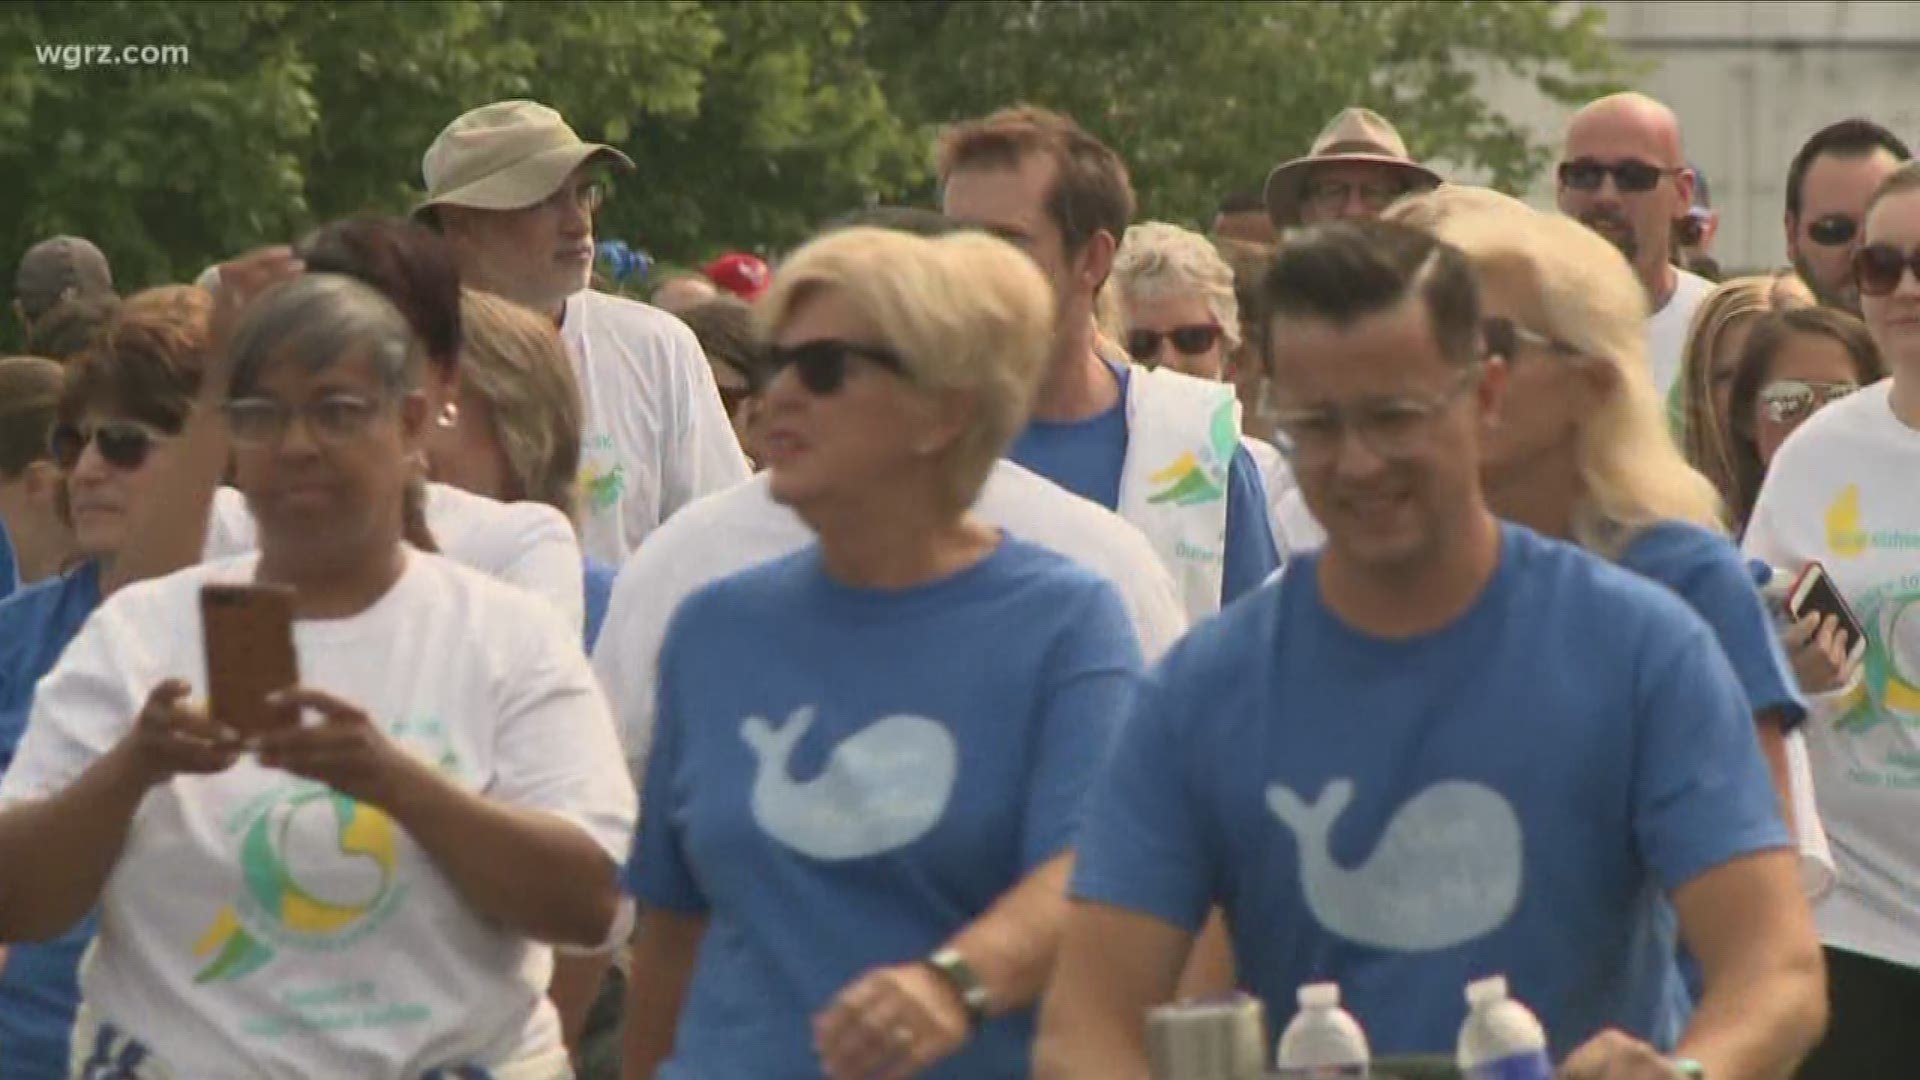 Walk to raise awareness about kidney health.